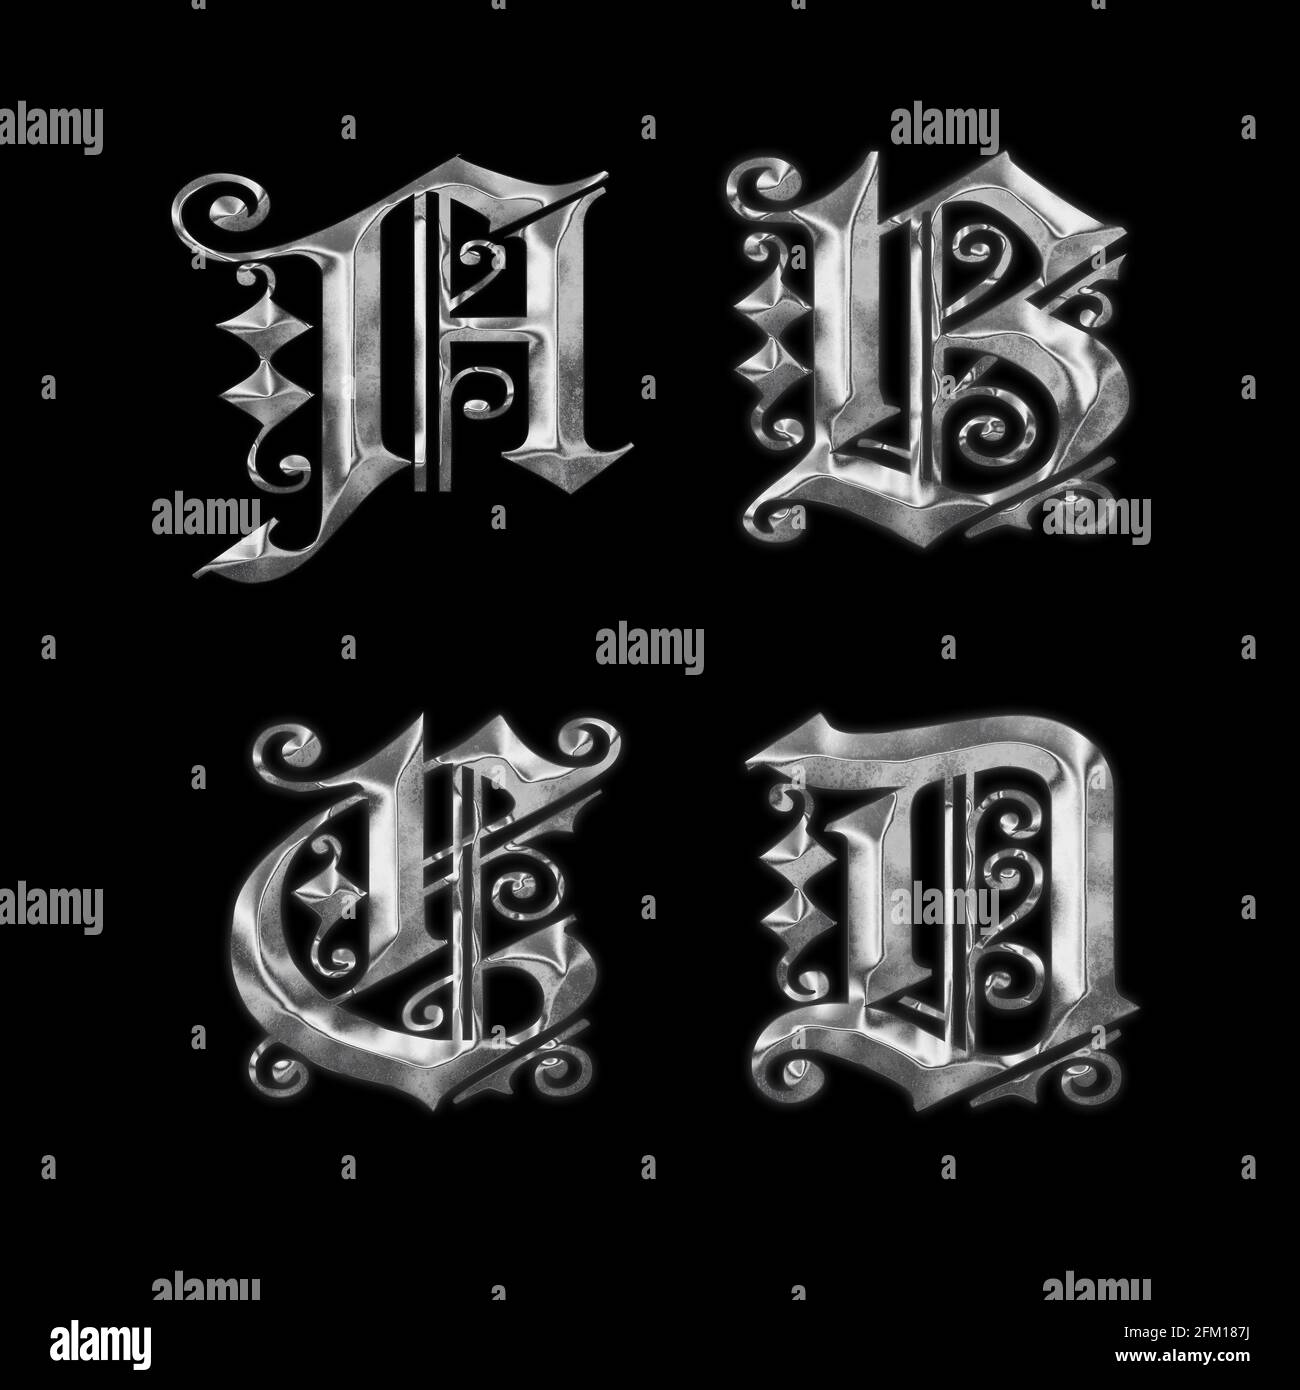 3D rendering of old Gothic metal capital letter alphabet - letters A-D Stock Photo